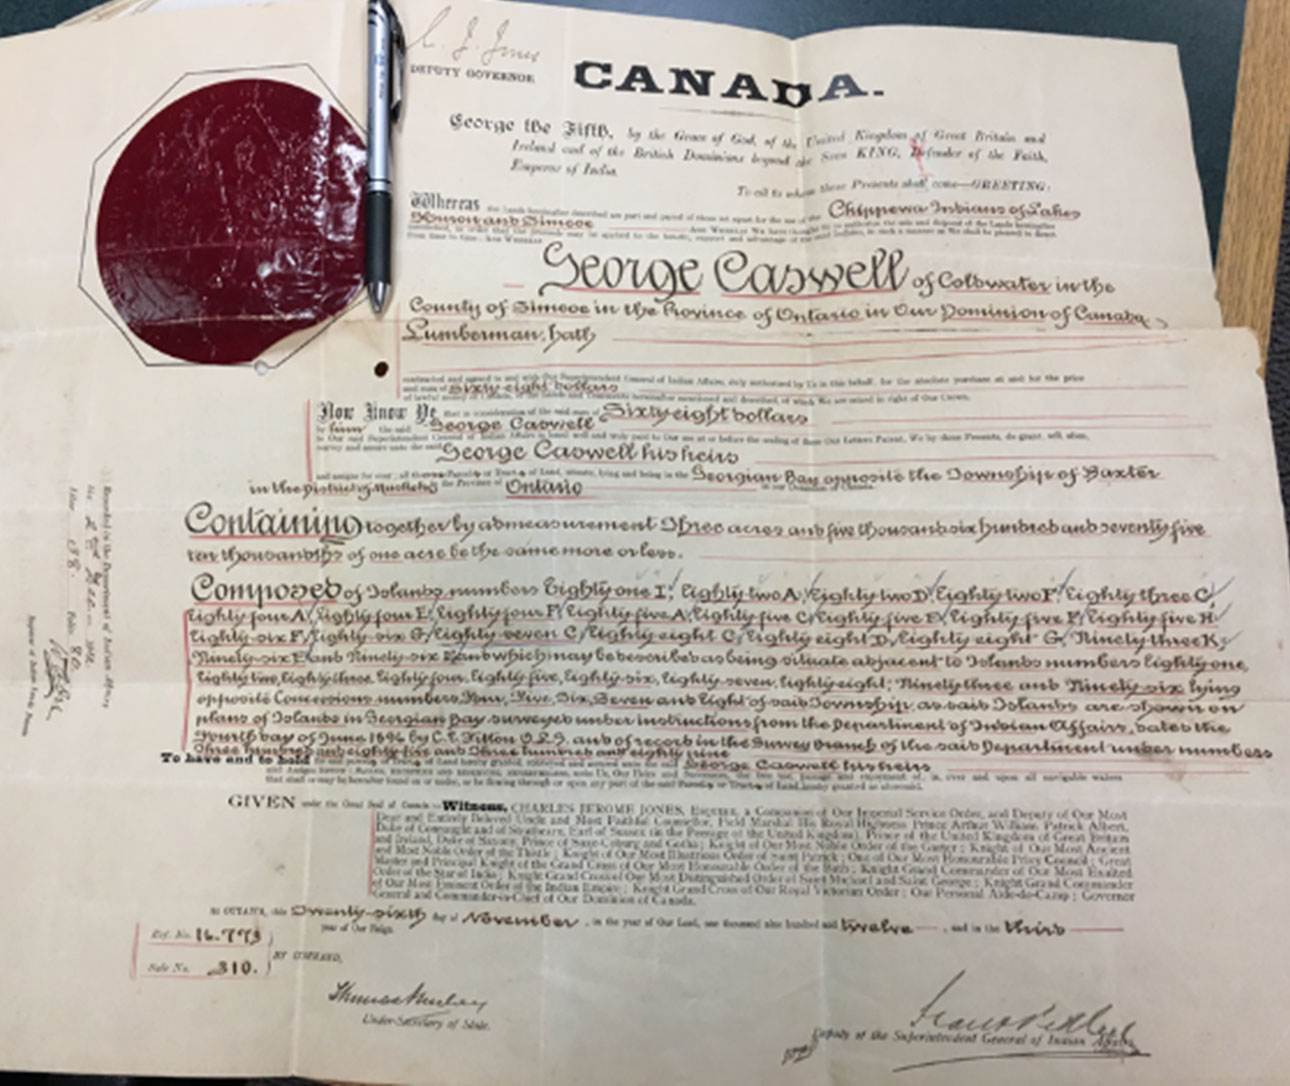 A federal patent document issues for islands located in Georgian Bay.